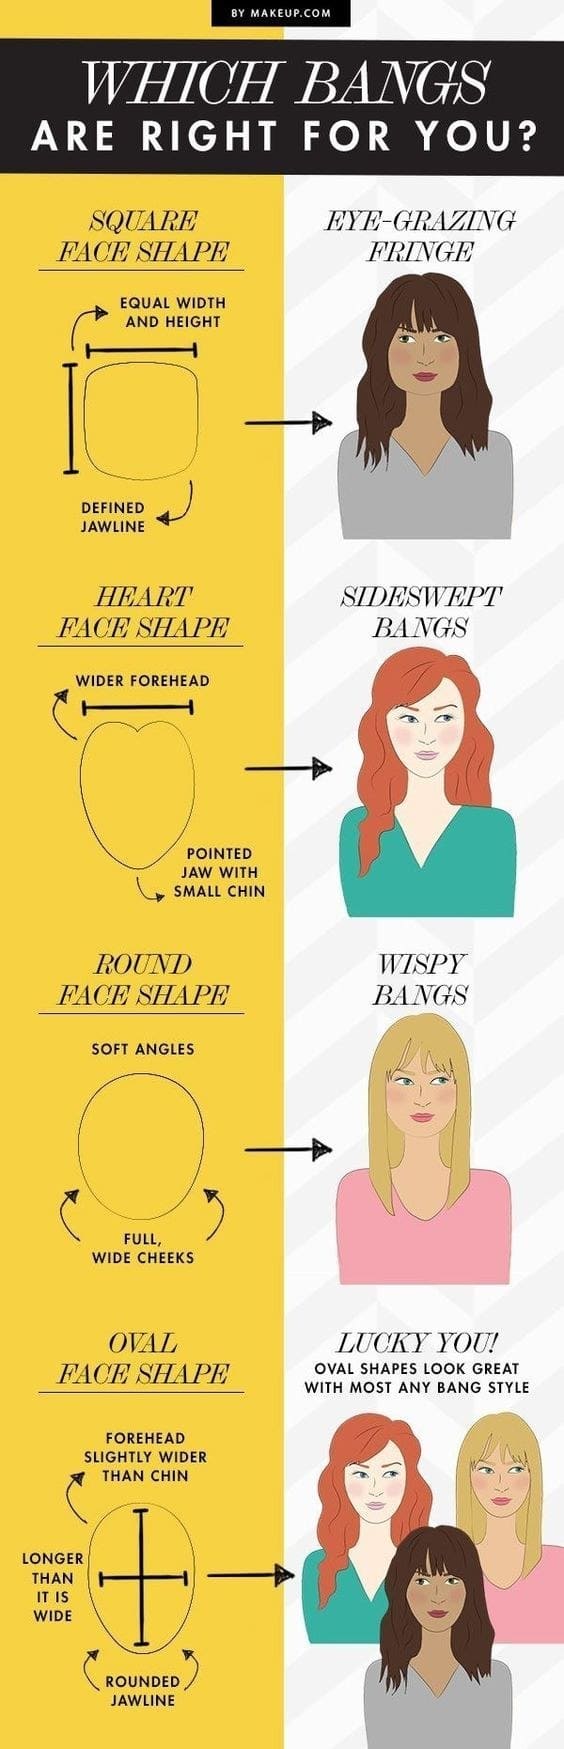 12 Ingeniously Useful Charts That Will Help You Have The Best Hair Of Your Life